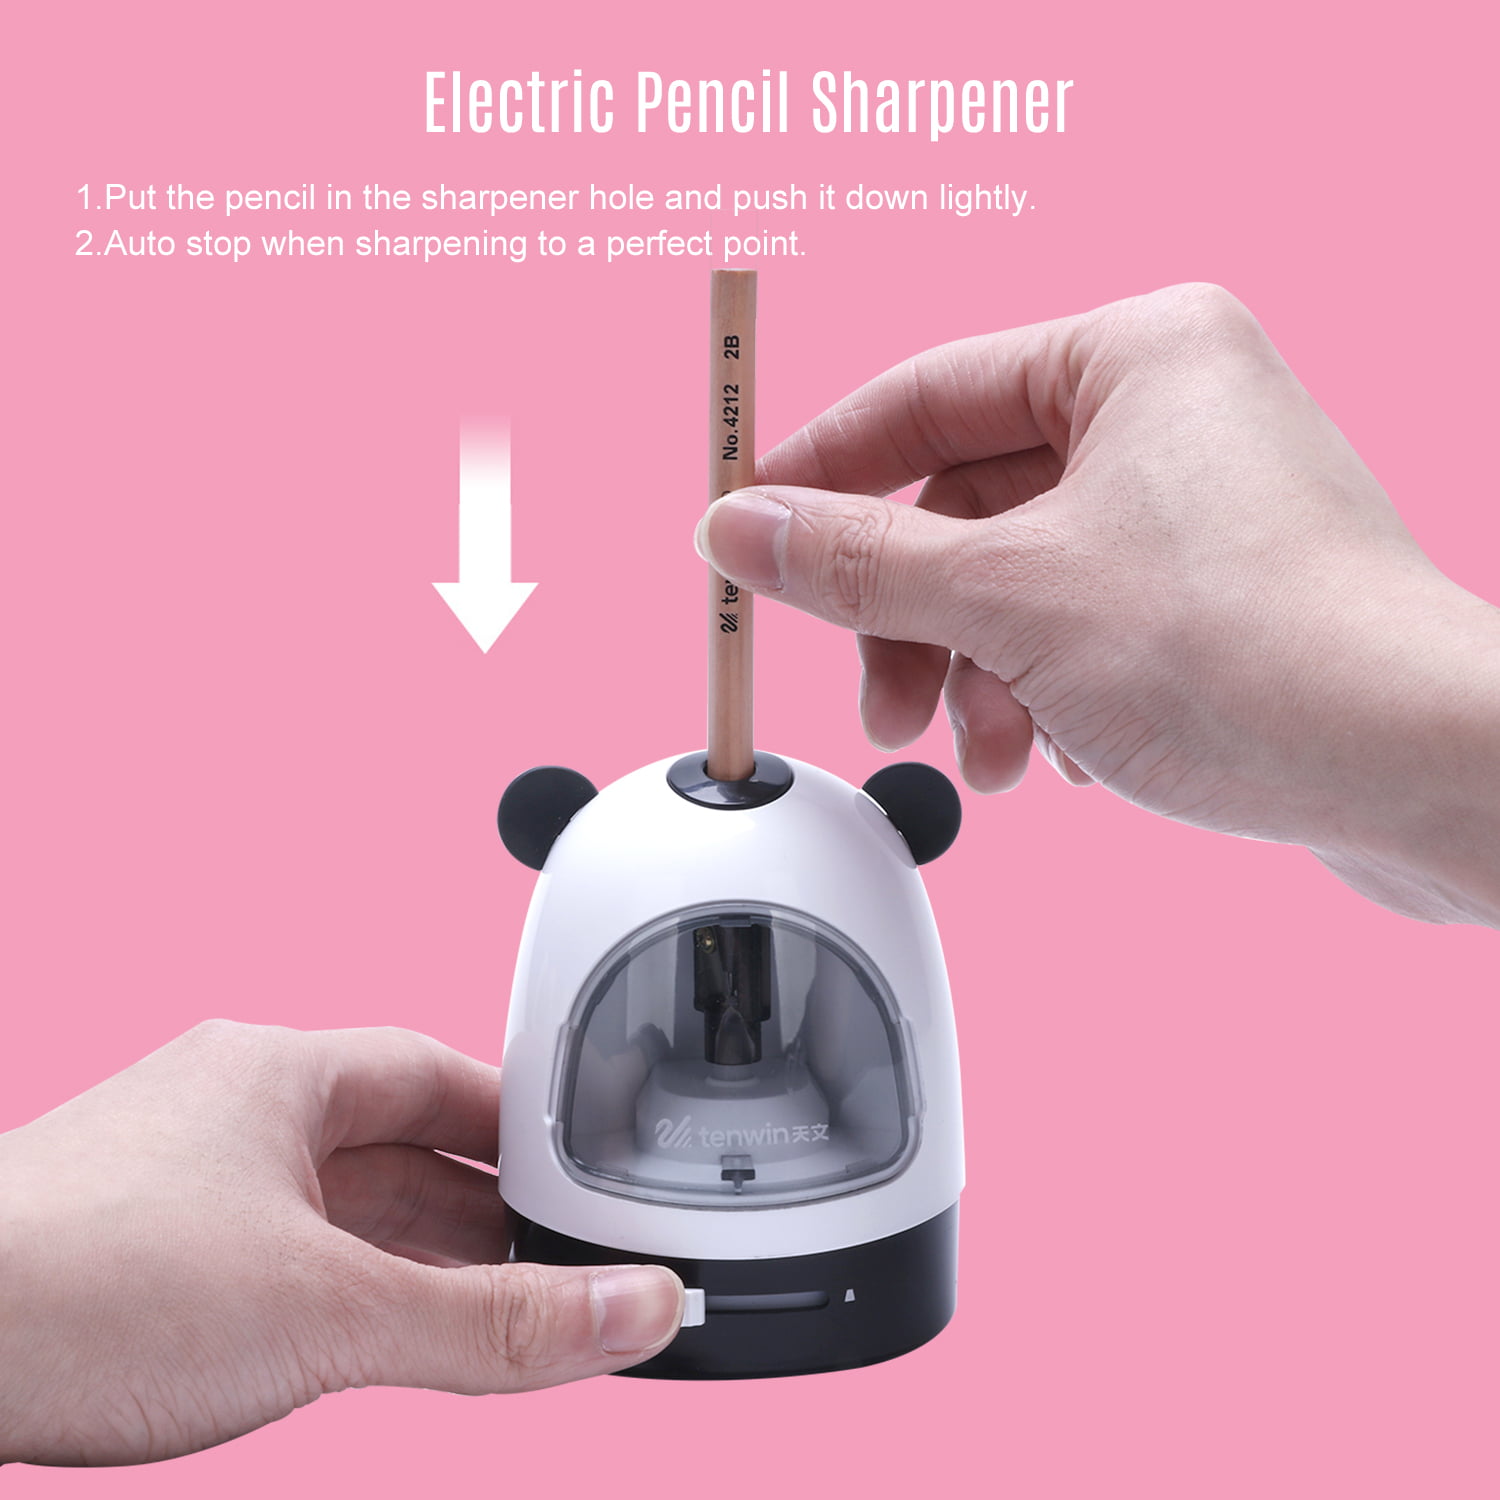 3 Settings, Details about   Colored Pencil Sharpener Electric For Pencils 6-8mm Fast Sharpen 